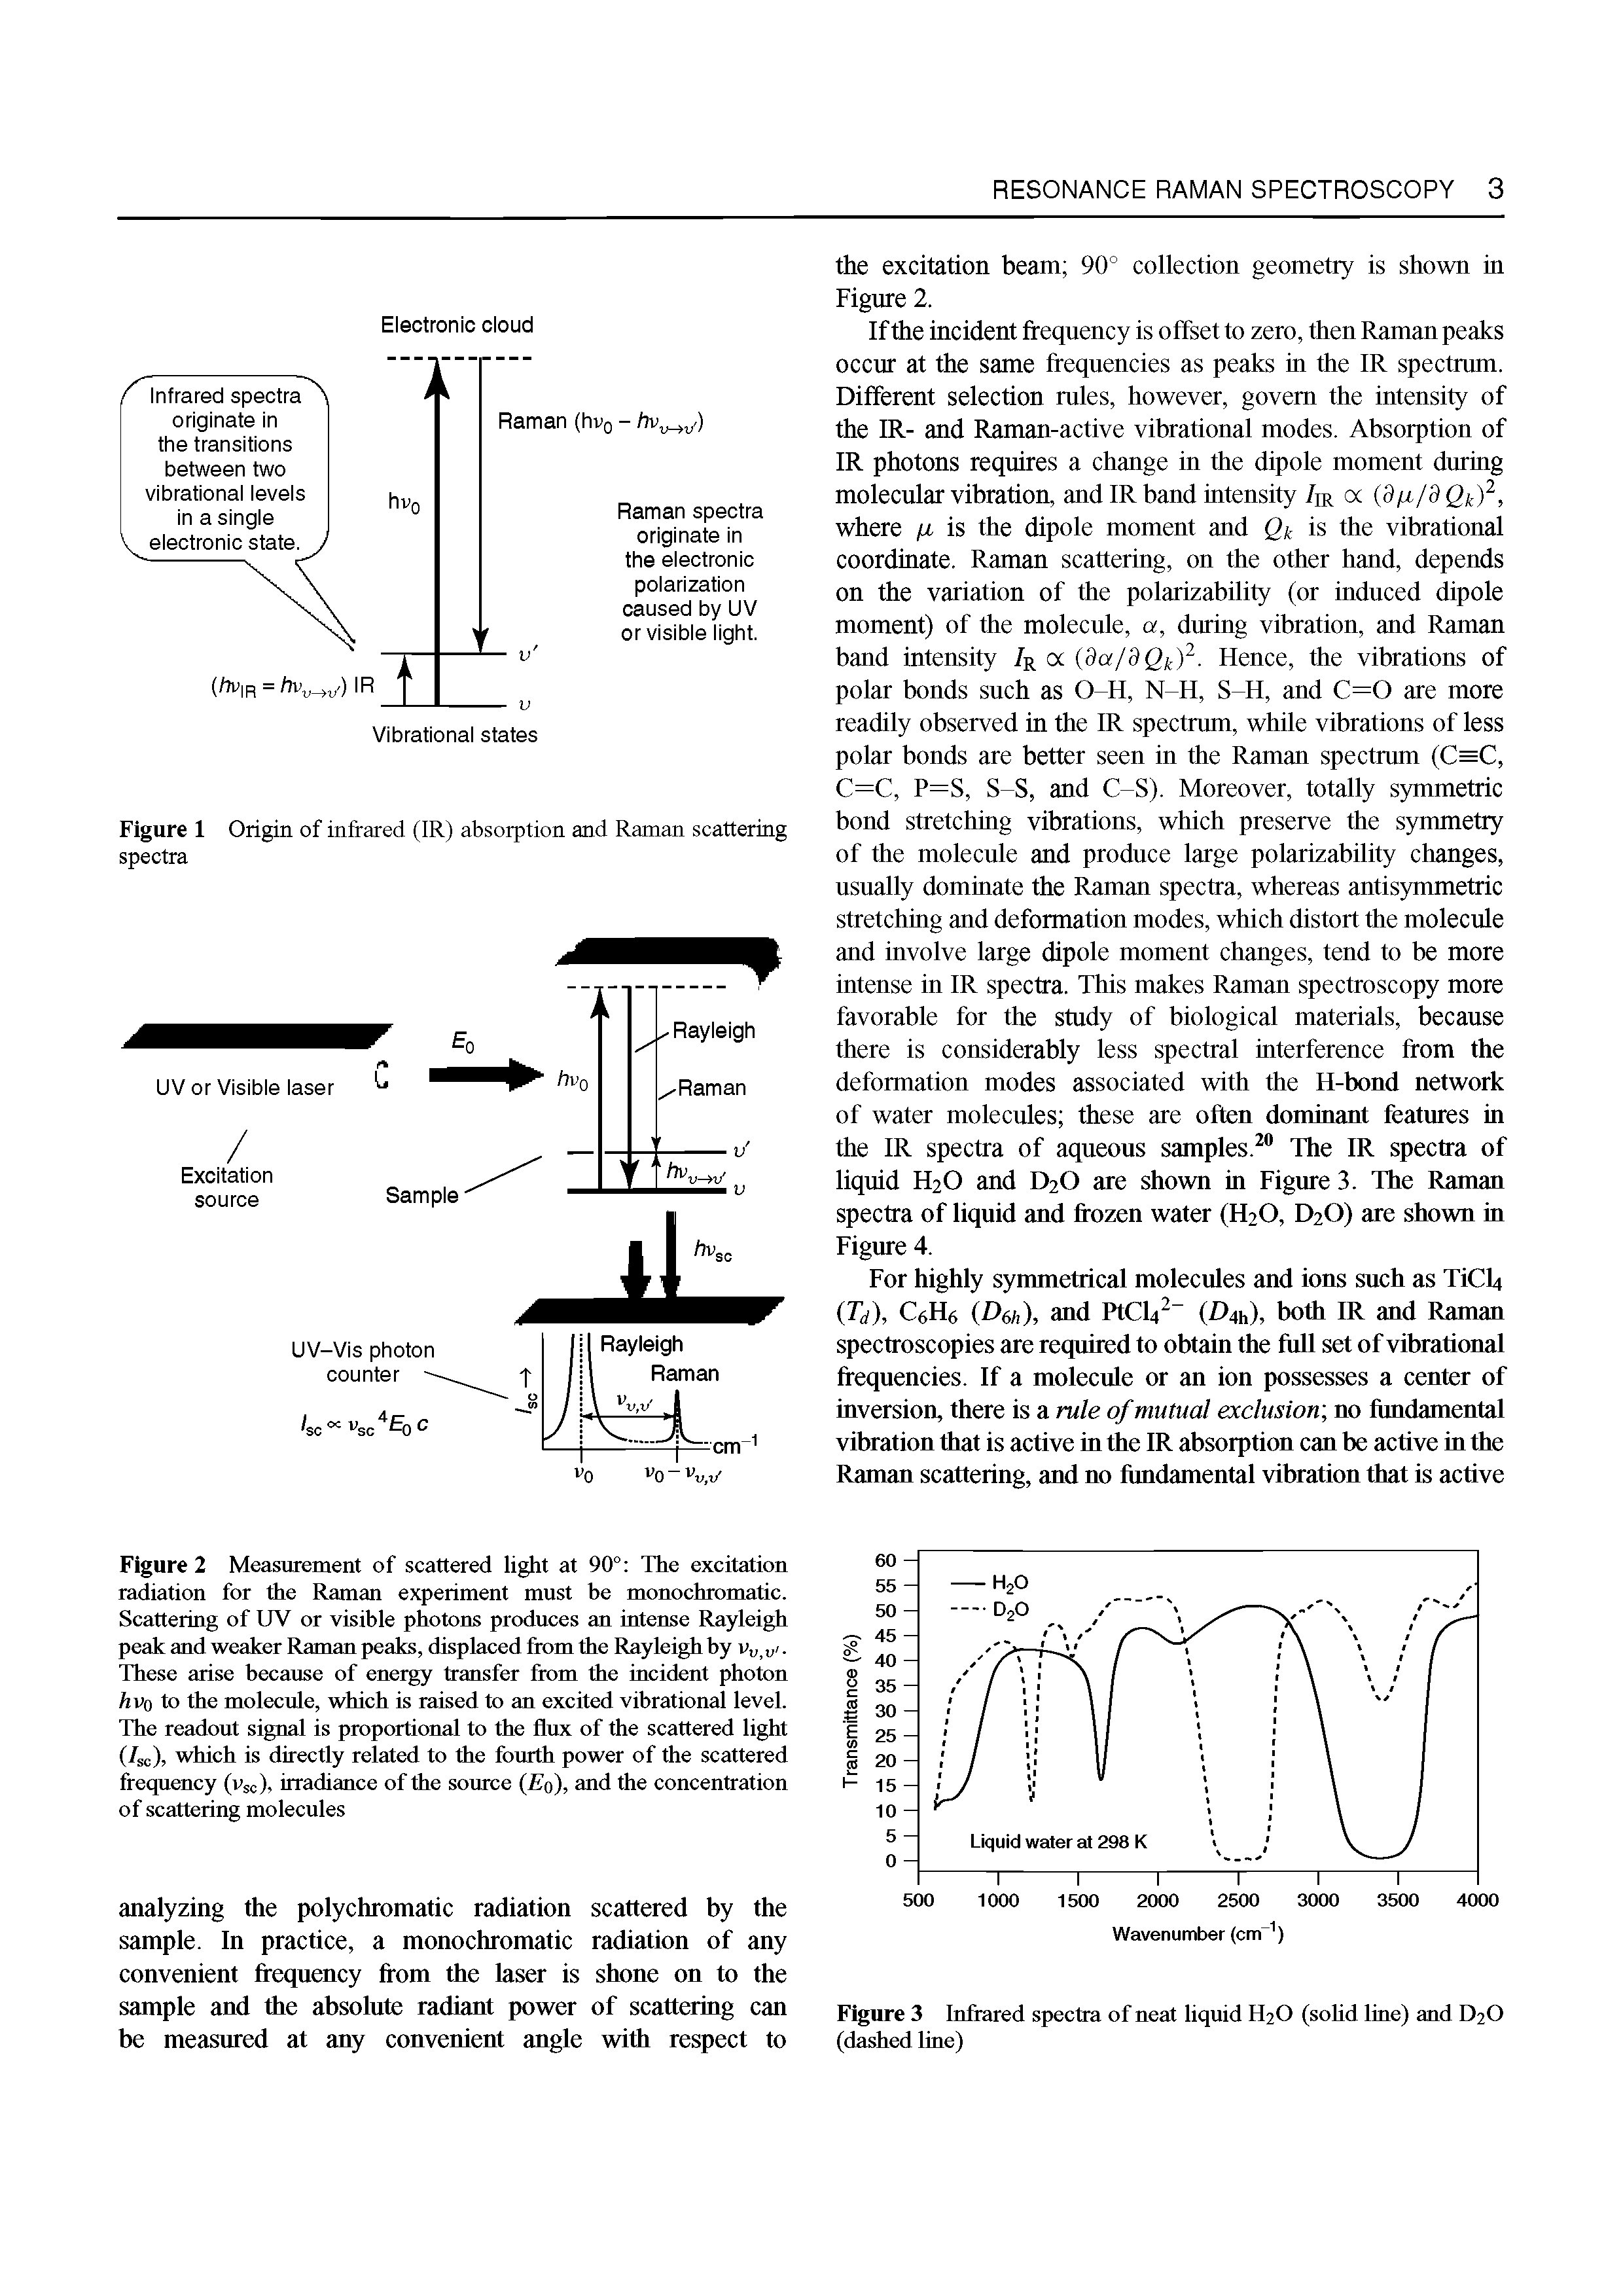 Figure 1 Origin of infrared (IR) absorption and Raman scattering spectra...